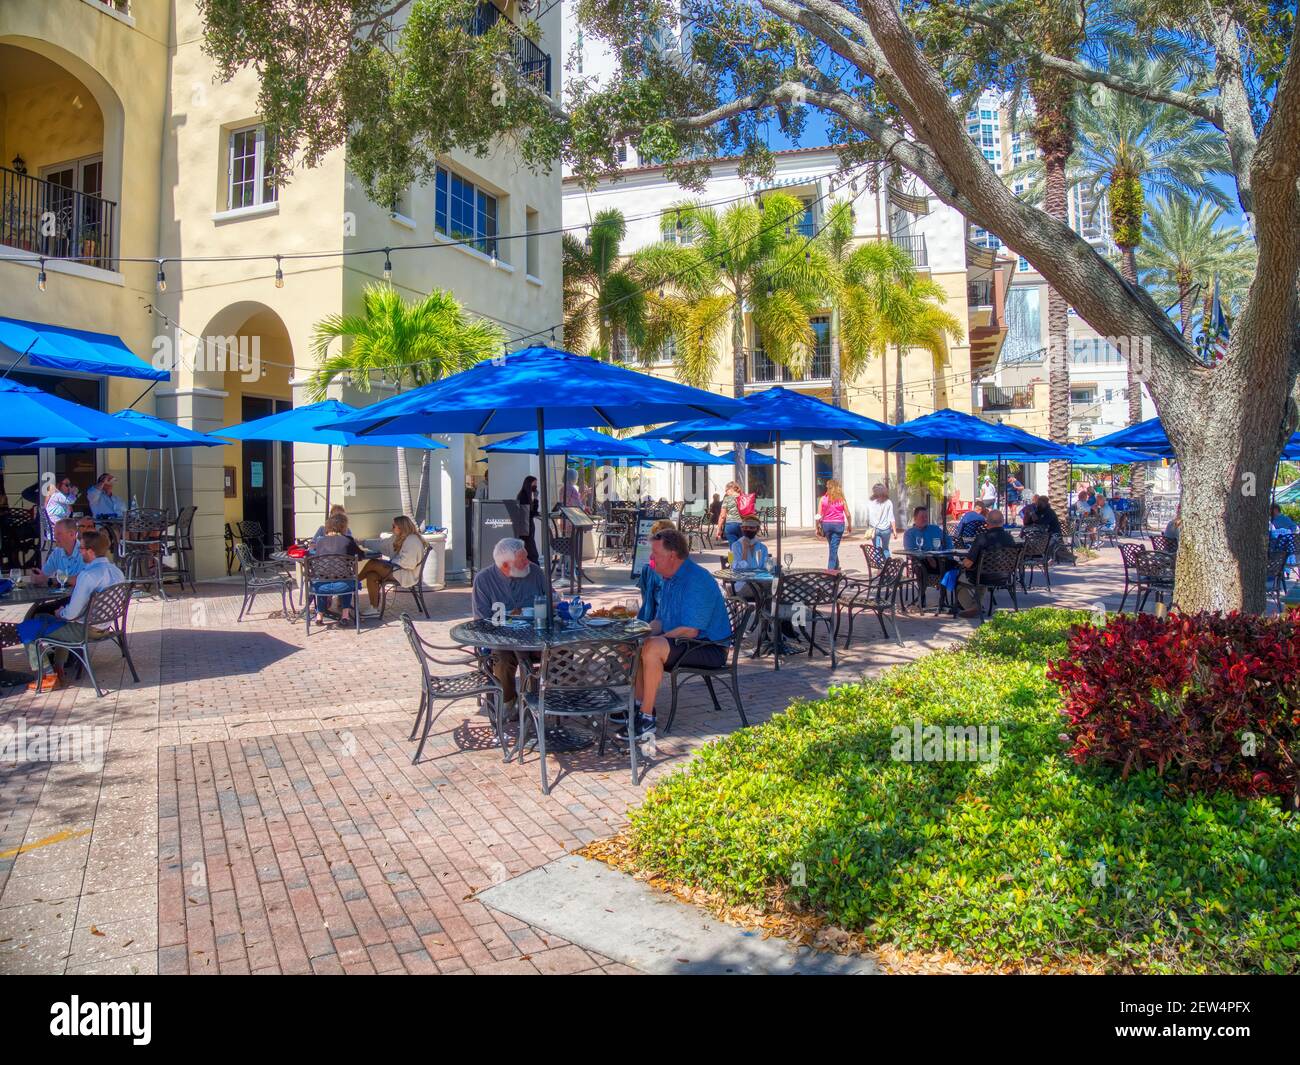 People eating at an outdoor cafe on the sidewalk on Beach Drive NE in St Petersbutg Florida USA Stock Photo